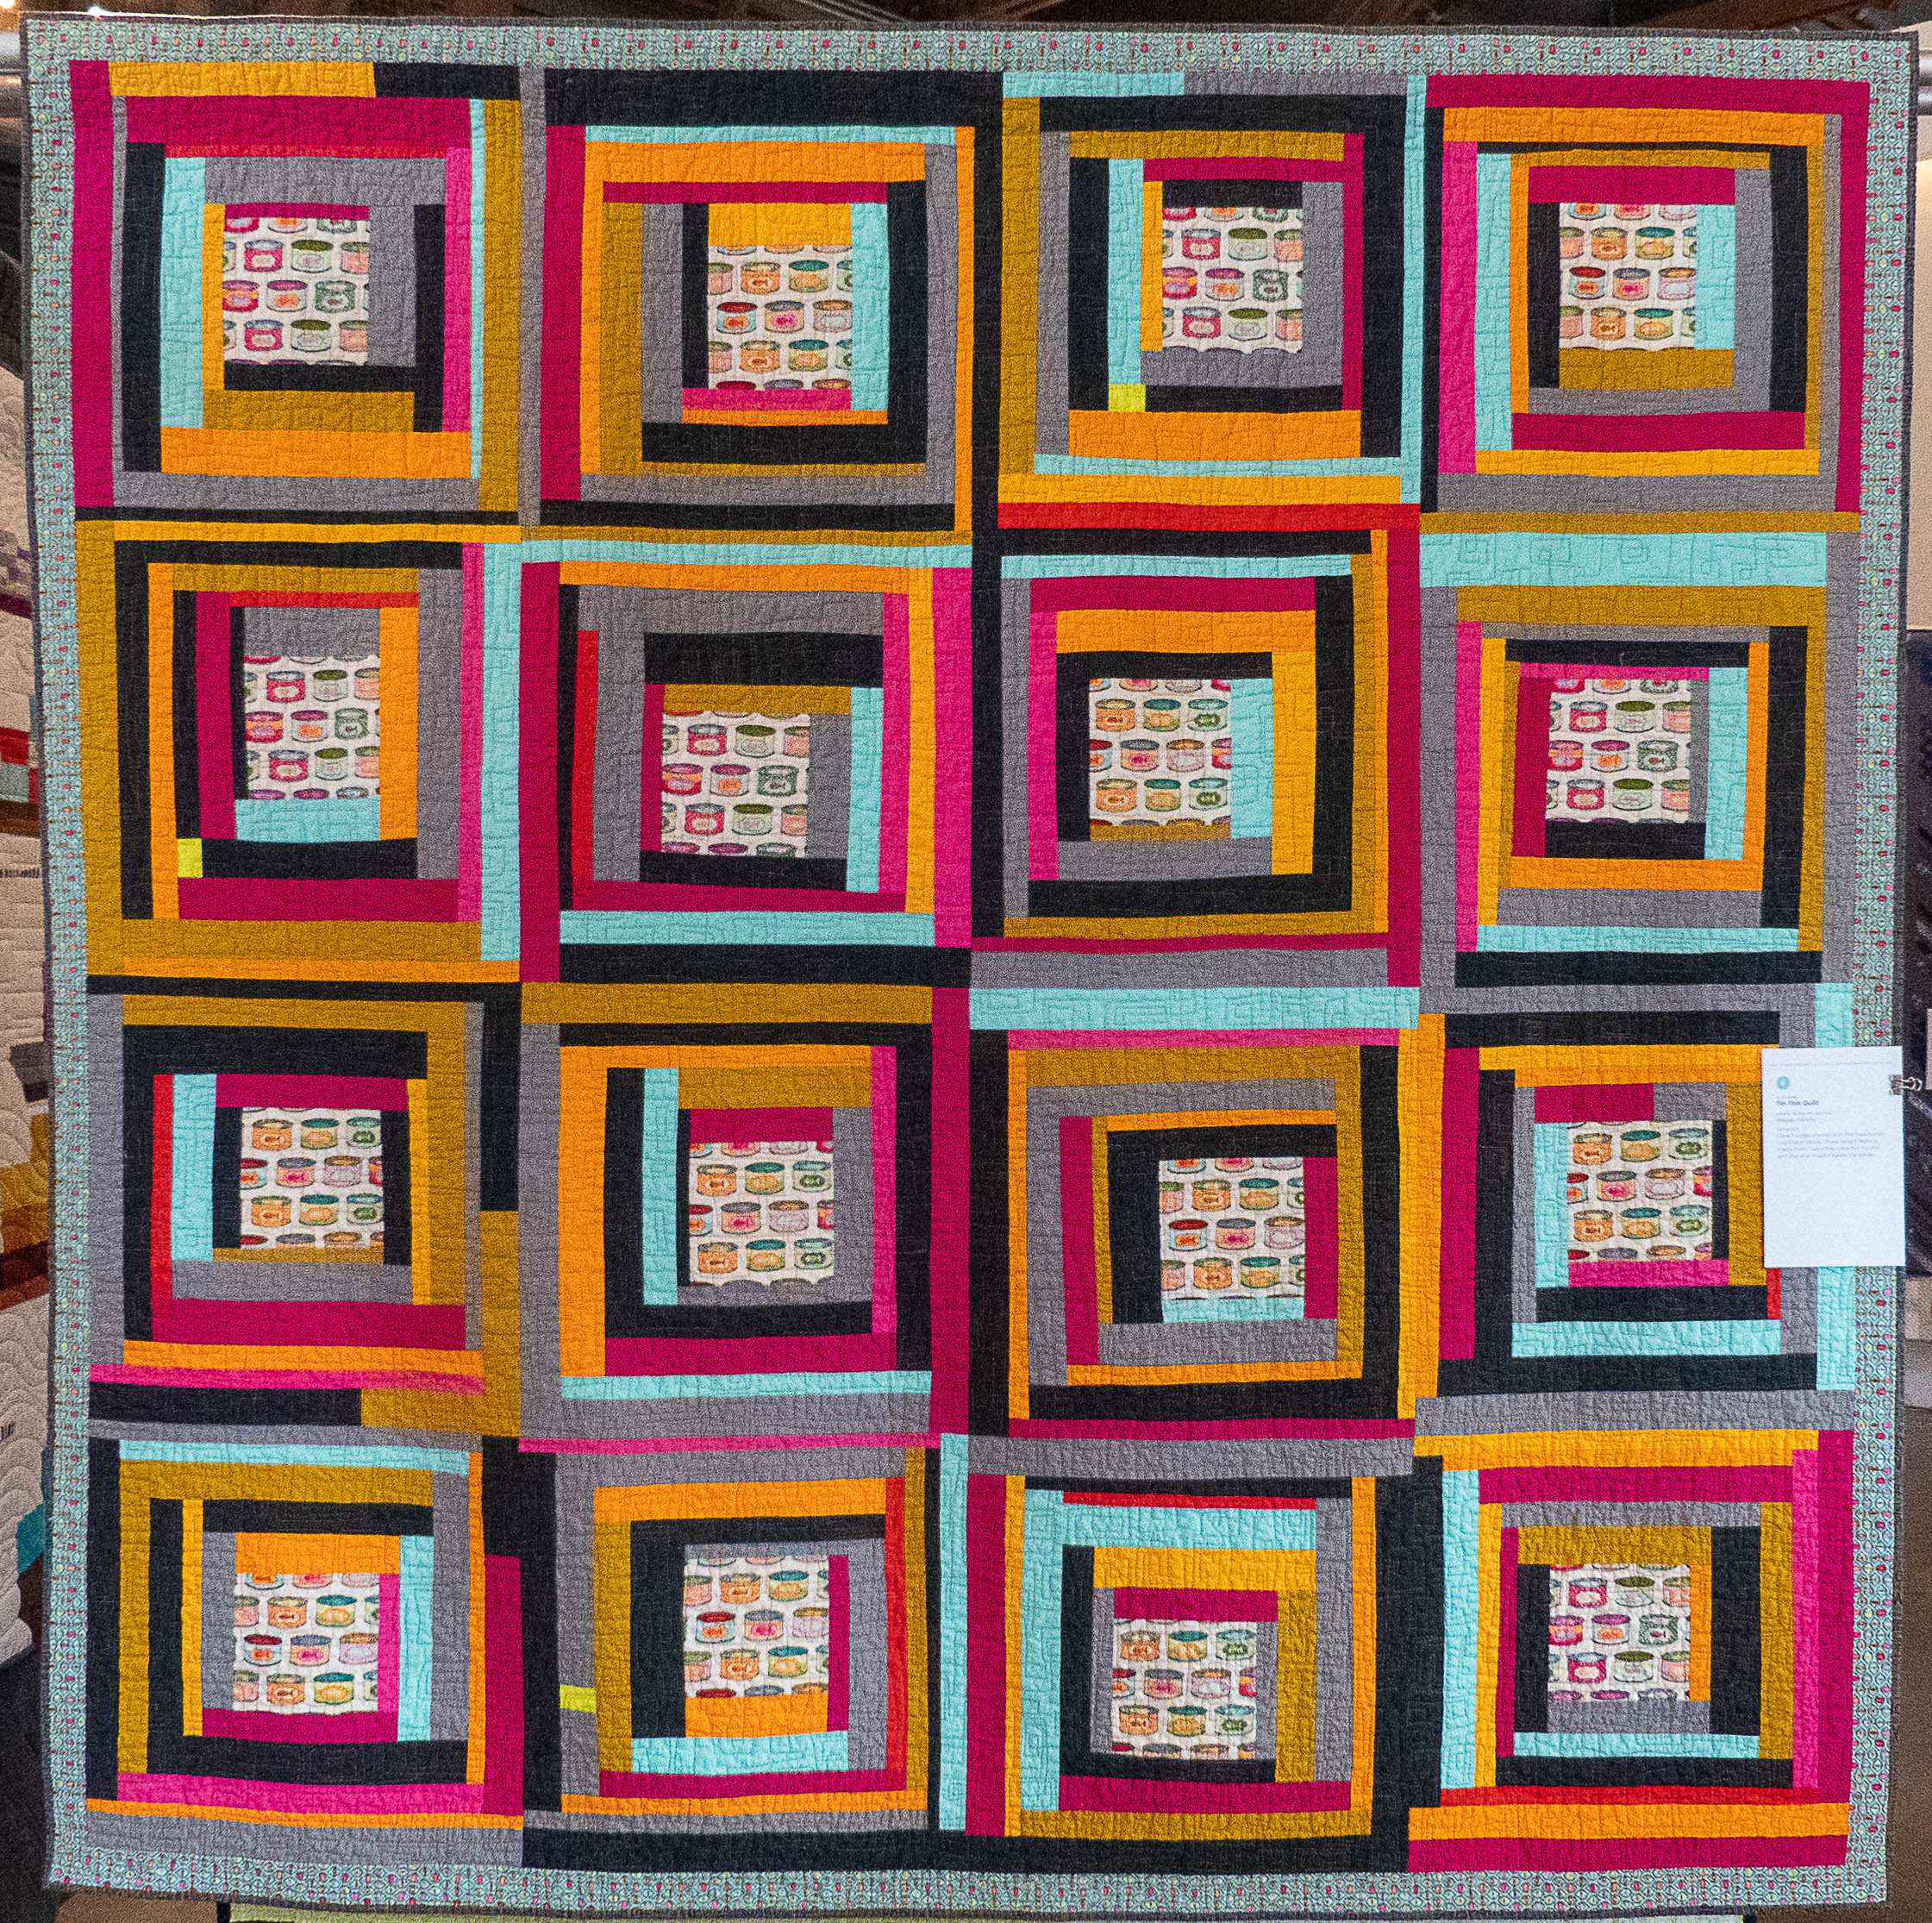 Modern quilt using the log cabin block design in bright colours